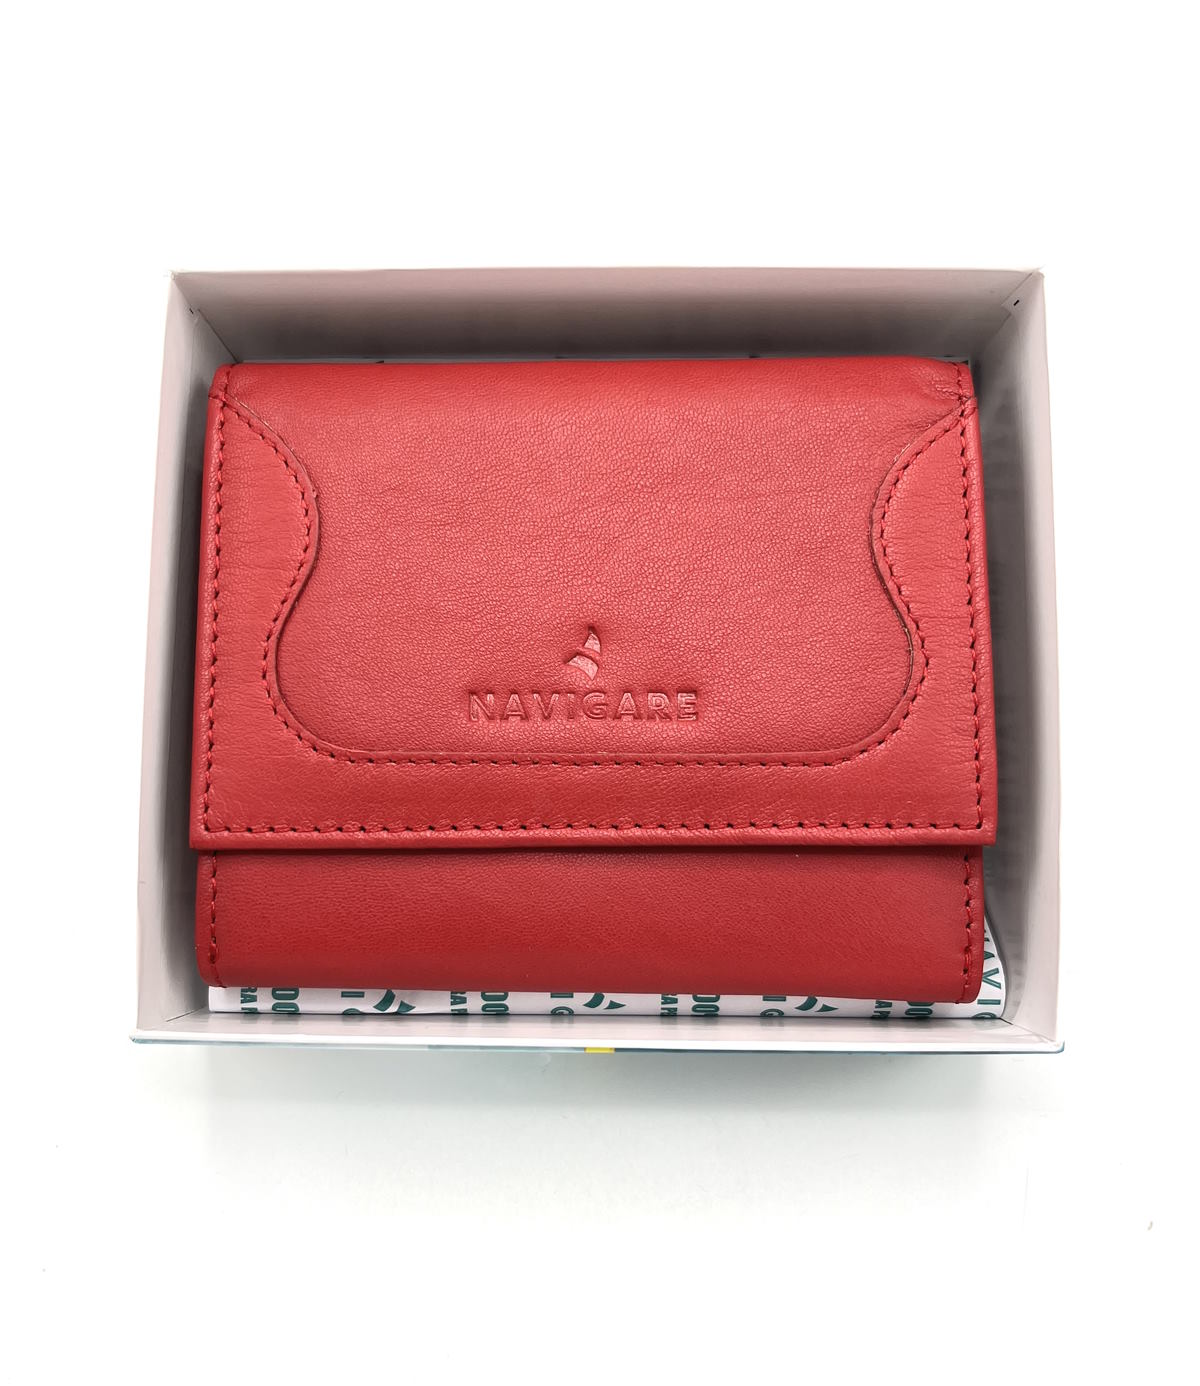 Brand Navigare, Genuine leather wallet, art. PF759-57.062